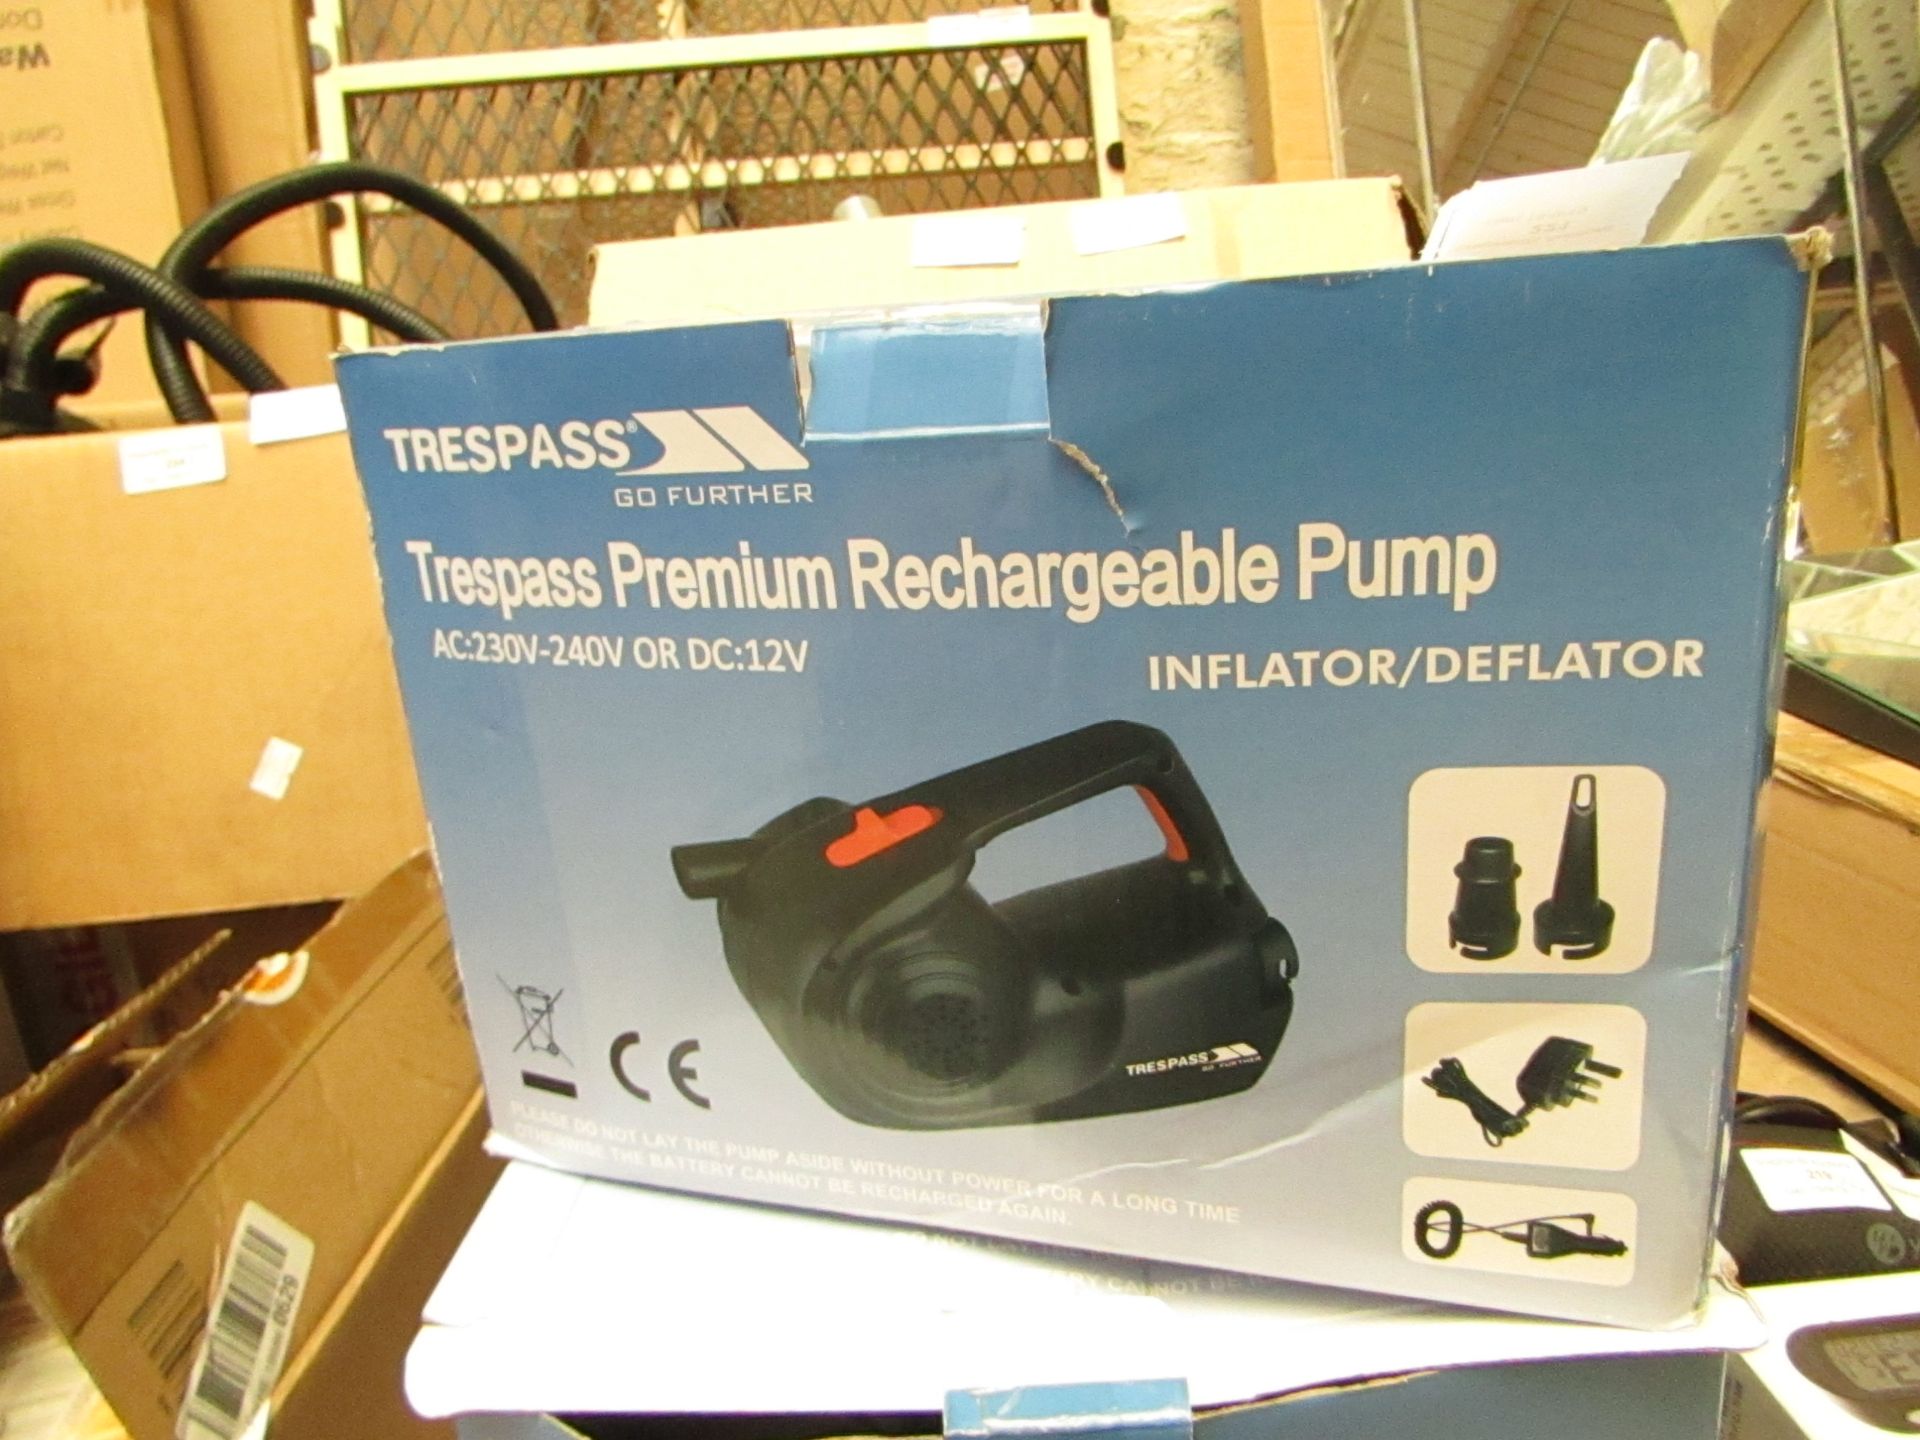 Trepass Premium Rechargeable Pump boxed unchecked